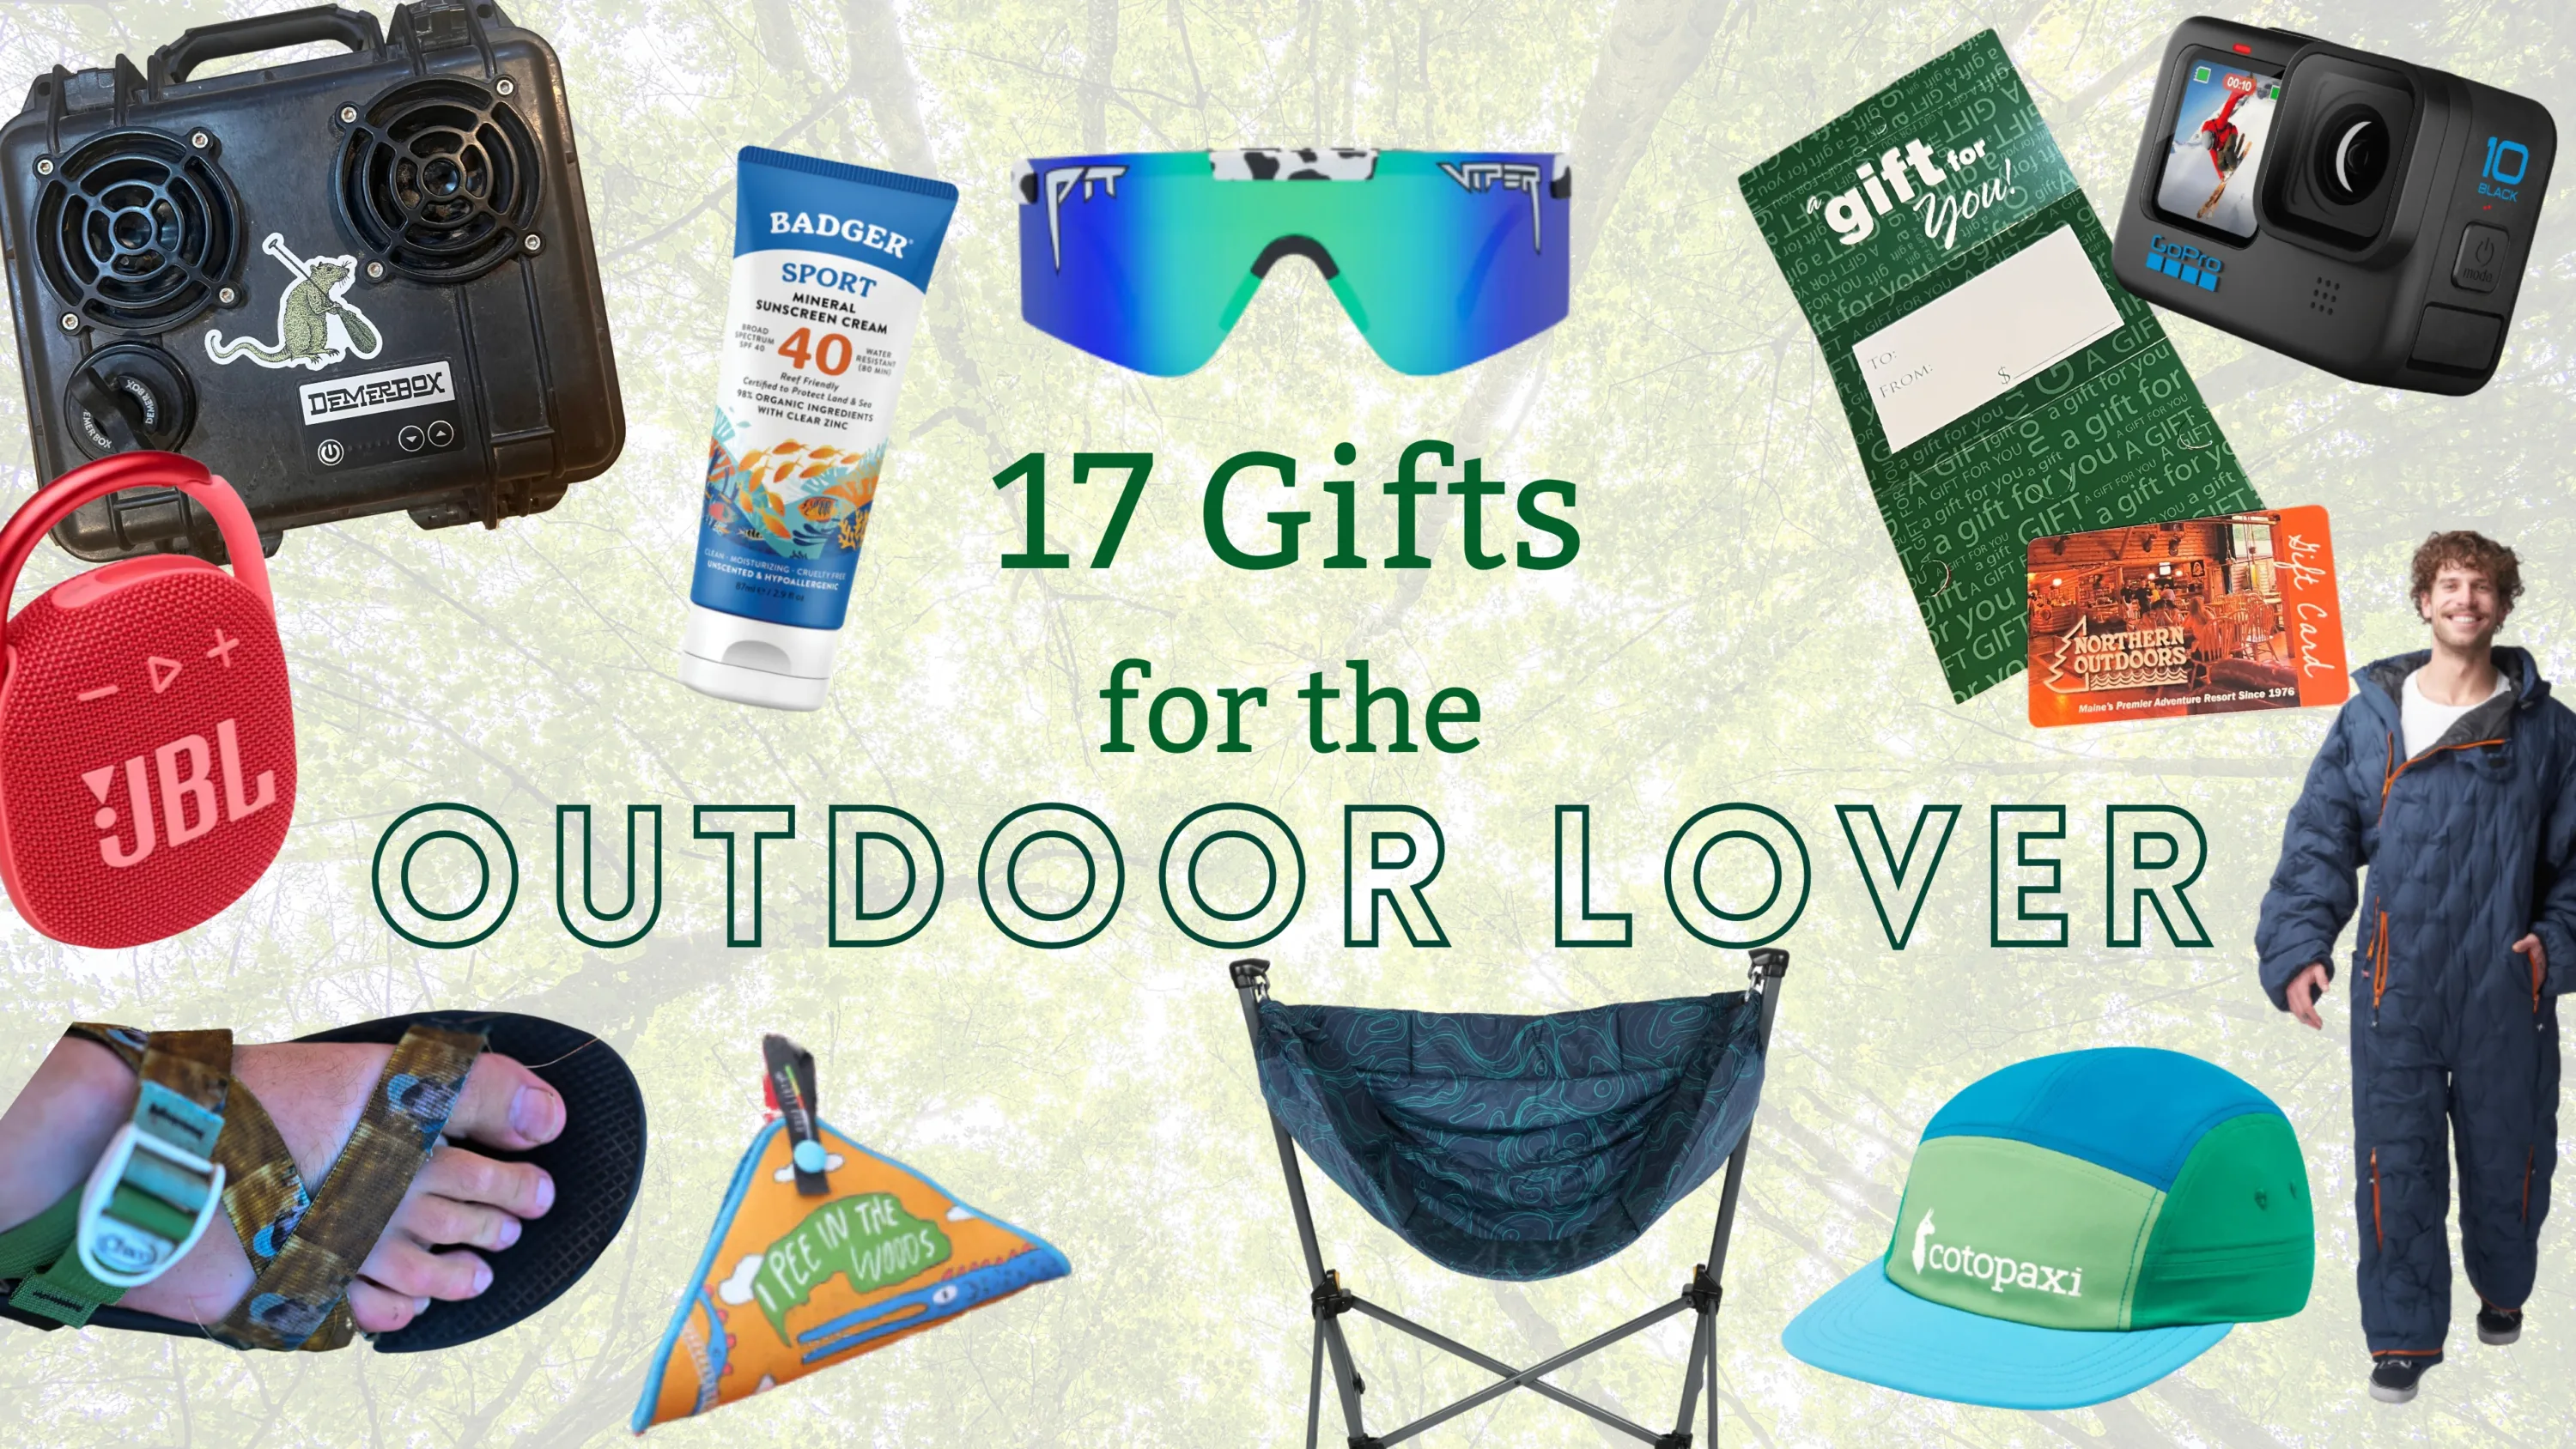 https://www.northernoutdoors.com/wp-content/uploads/17-Gifts-for-the-Outdoor-Lover-1-scaled.webp